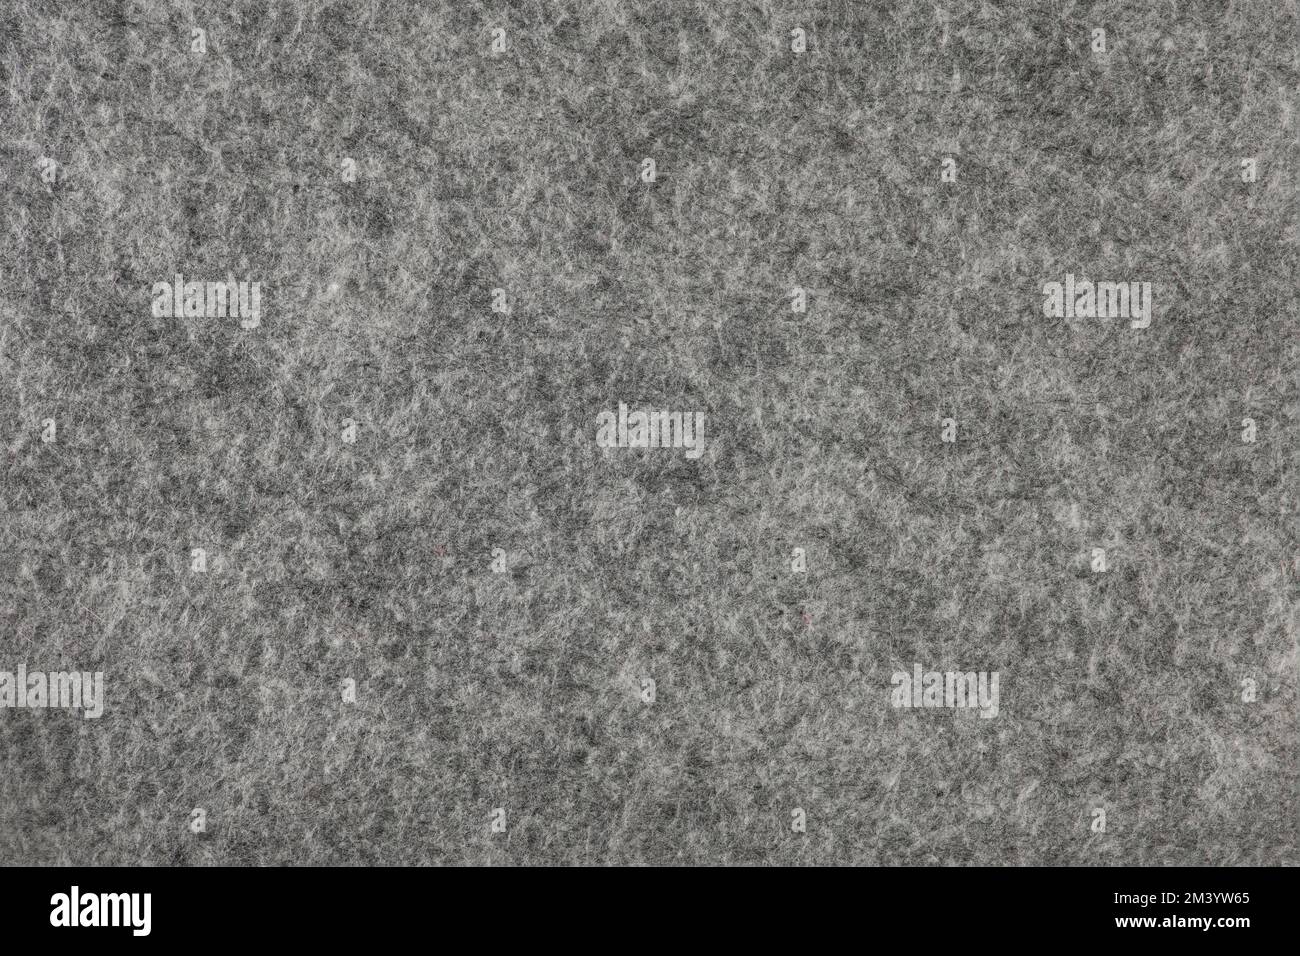 Felt texture. Texture of gray felt. Abstract background with natural gray felt. High resolution texture photo Stock Photo